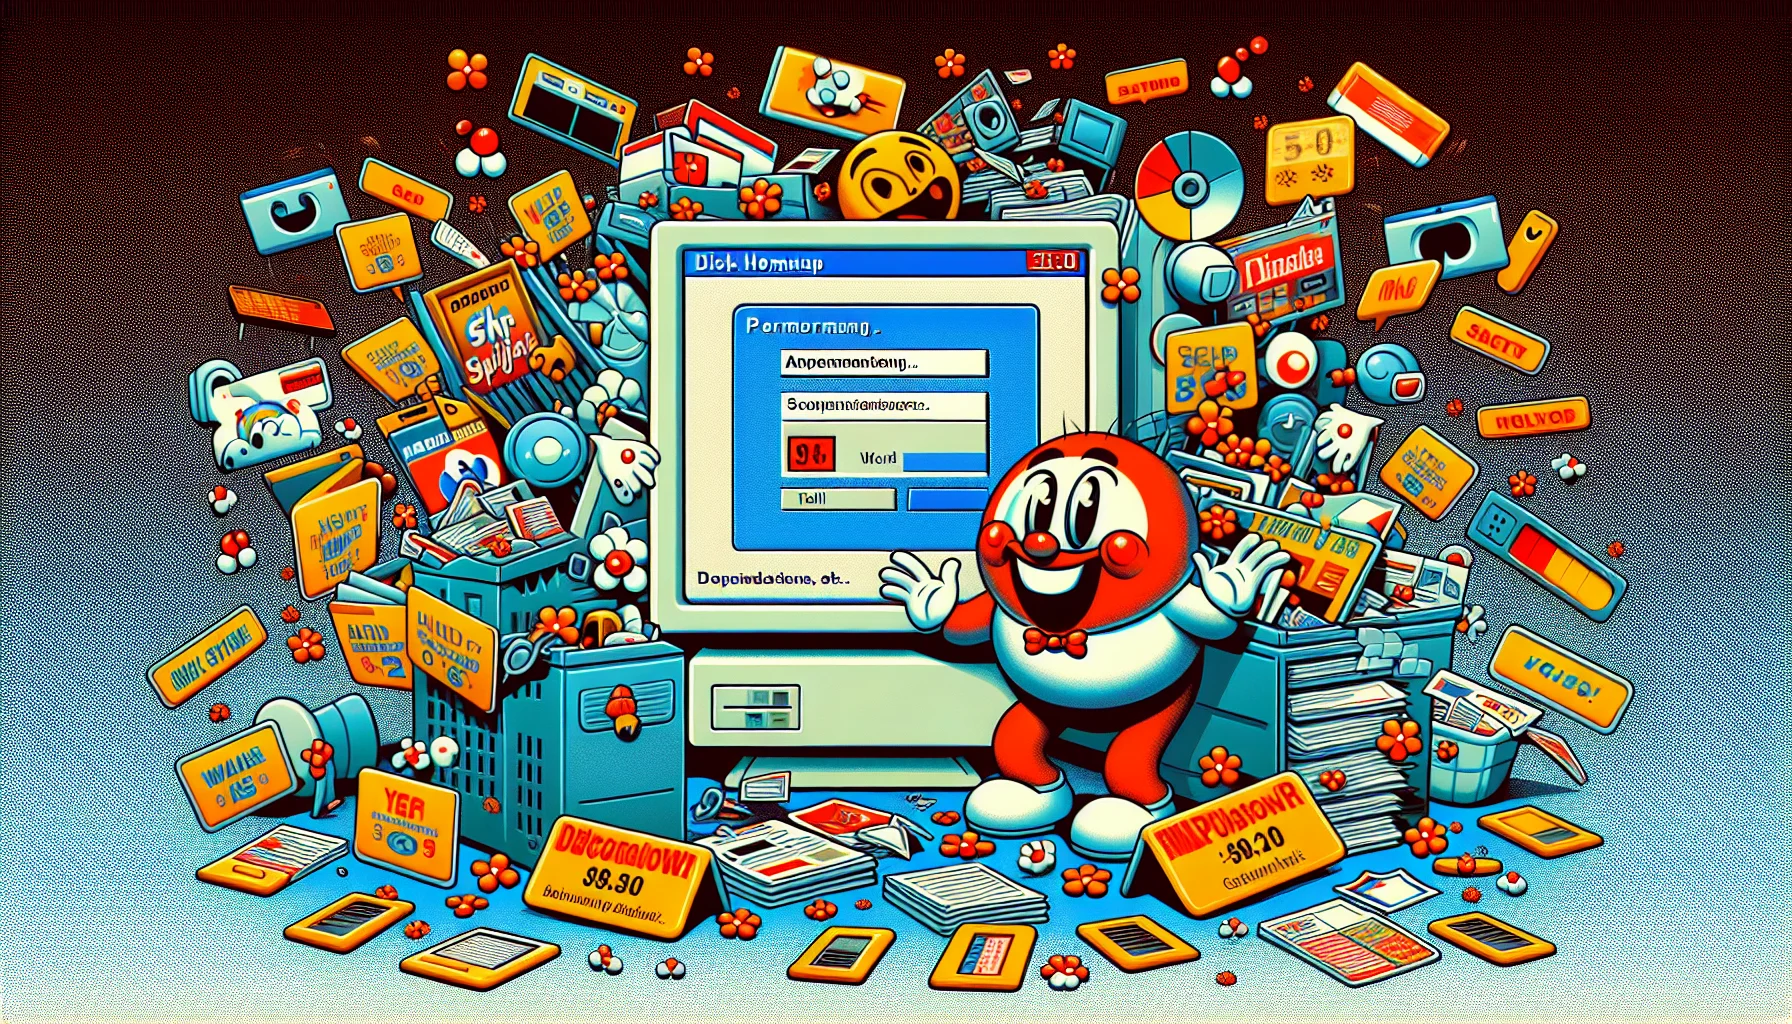 Create an amusing image that depicts a comedic tech scenario involving an operating system from early 2000's, styled to look enticing for those interested in web hosting. Show the interface bursting with an overflow of pop-up ads, a cheerful mascot struggling to maintain the site's performance, and a dominating countdown timer for a disk cleanup, creating a comedic and chaotic scene.